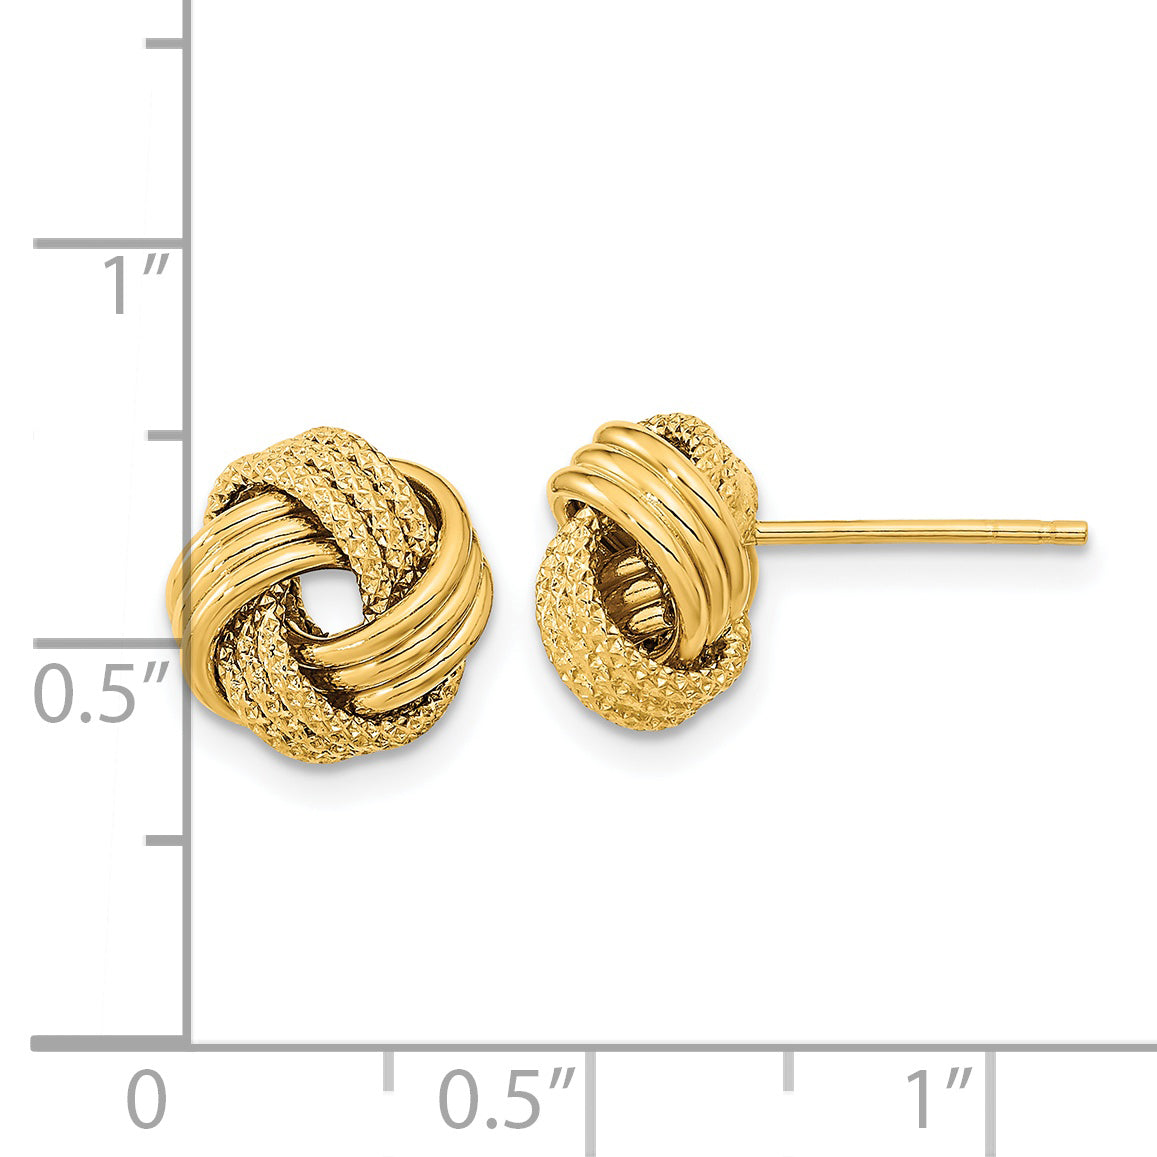 14k Polished Textured Love Knot Post Earrings